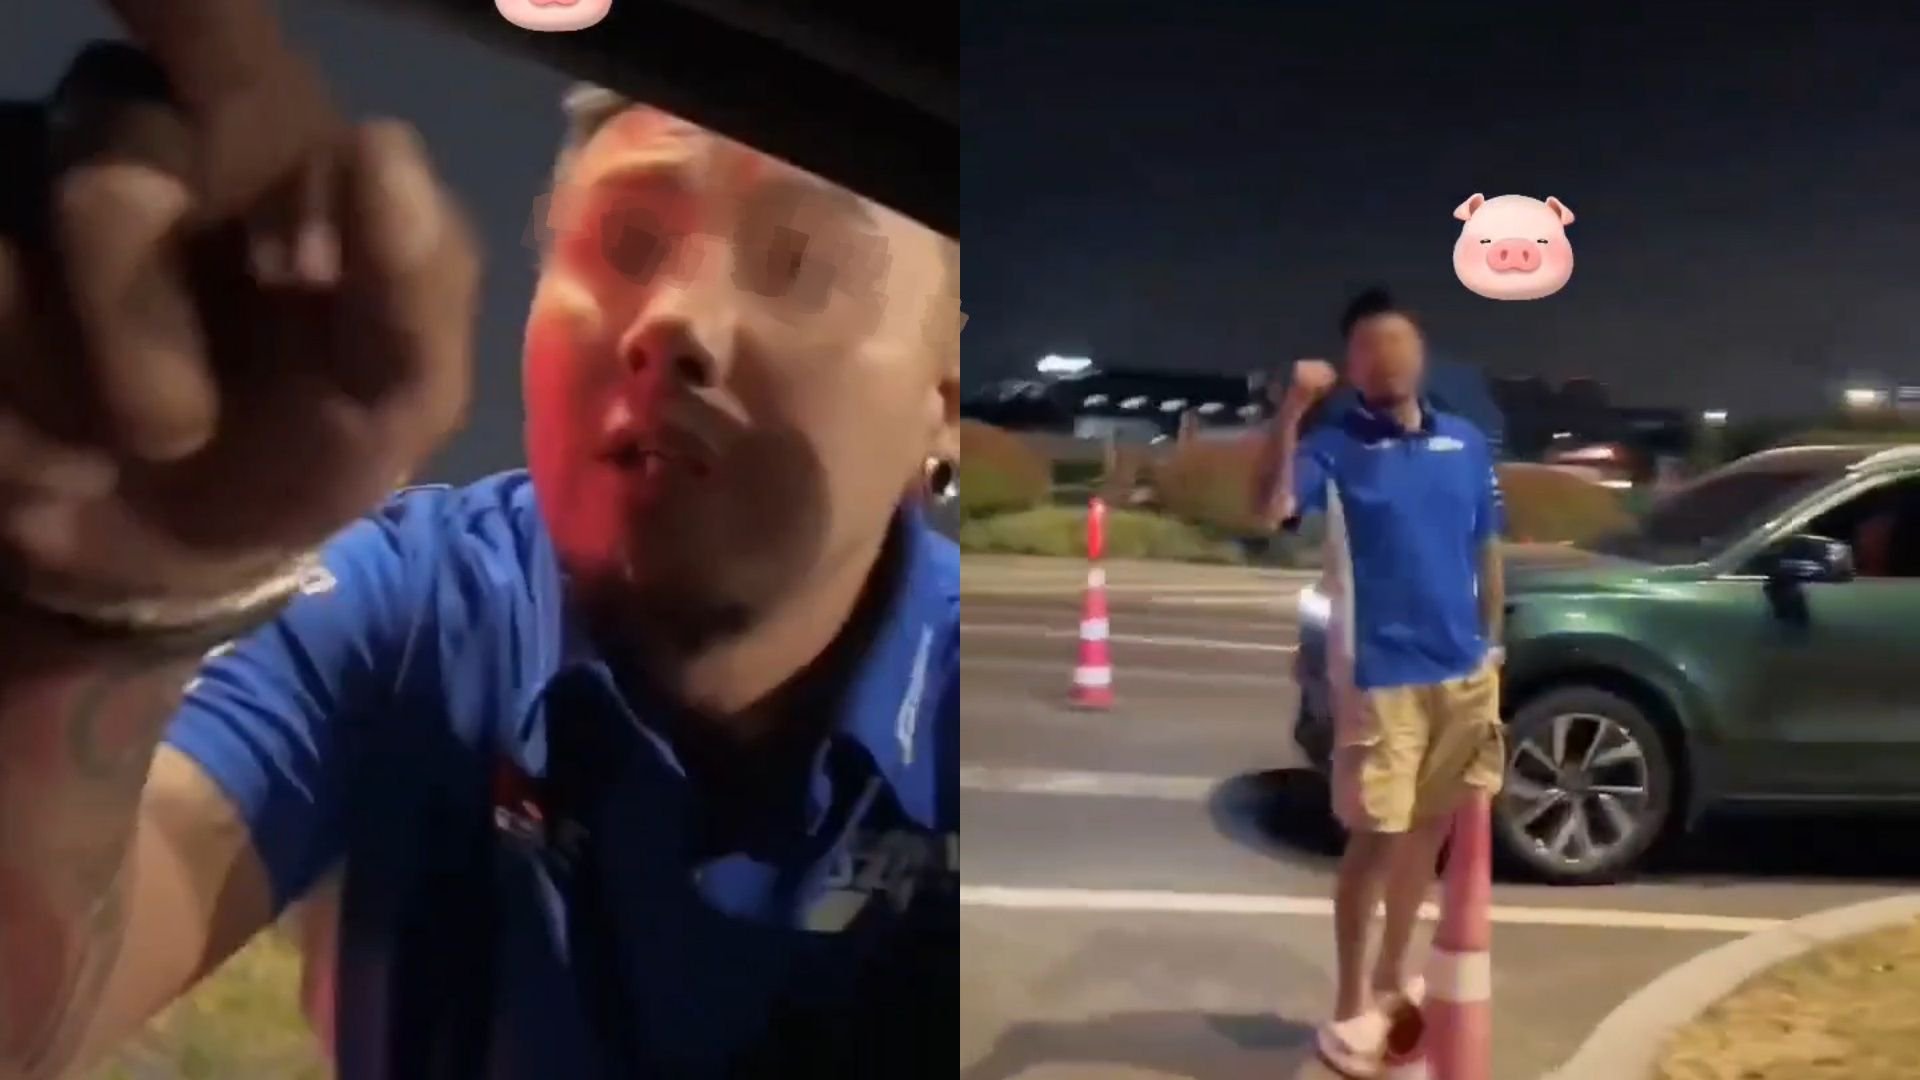  The Internet exposes that the man was intercepted, abused and threatened for driving late at night: the rule of law society saved you and get out of Nanjing